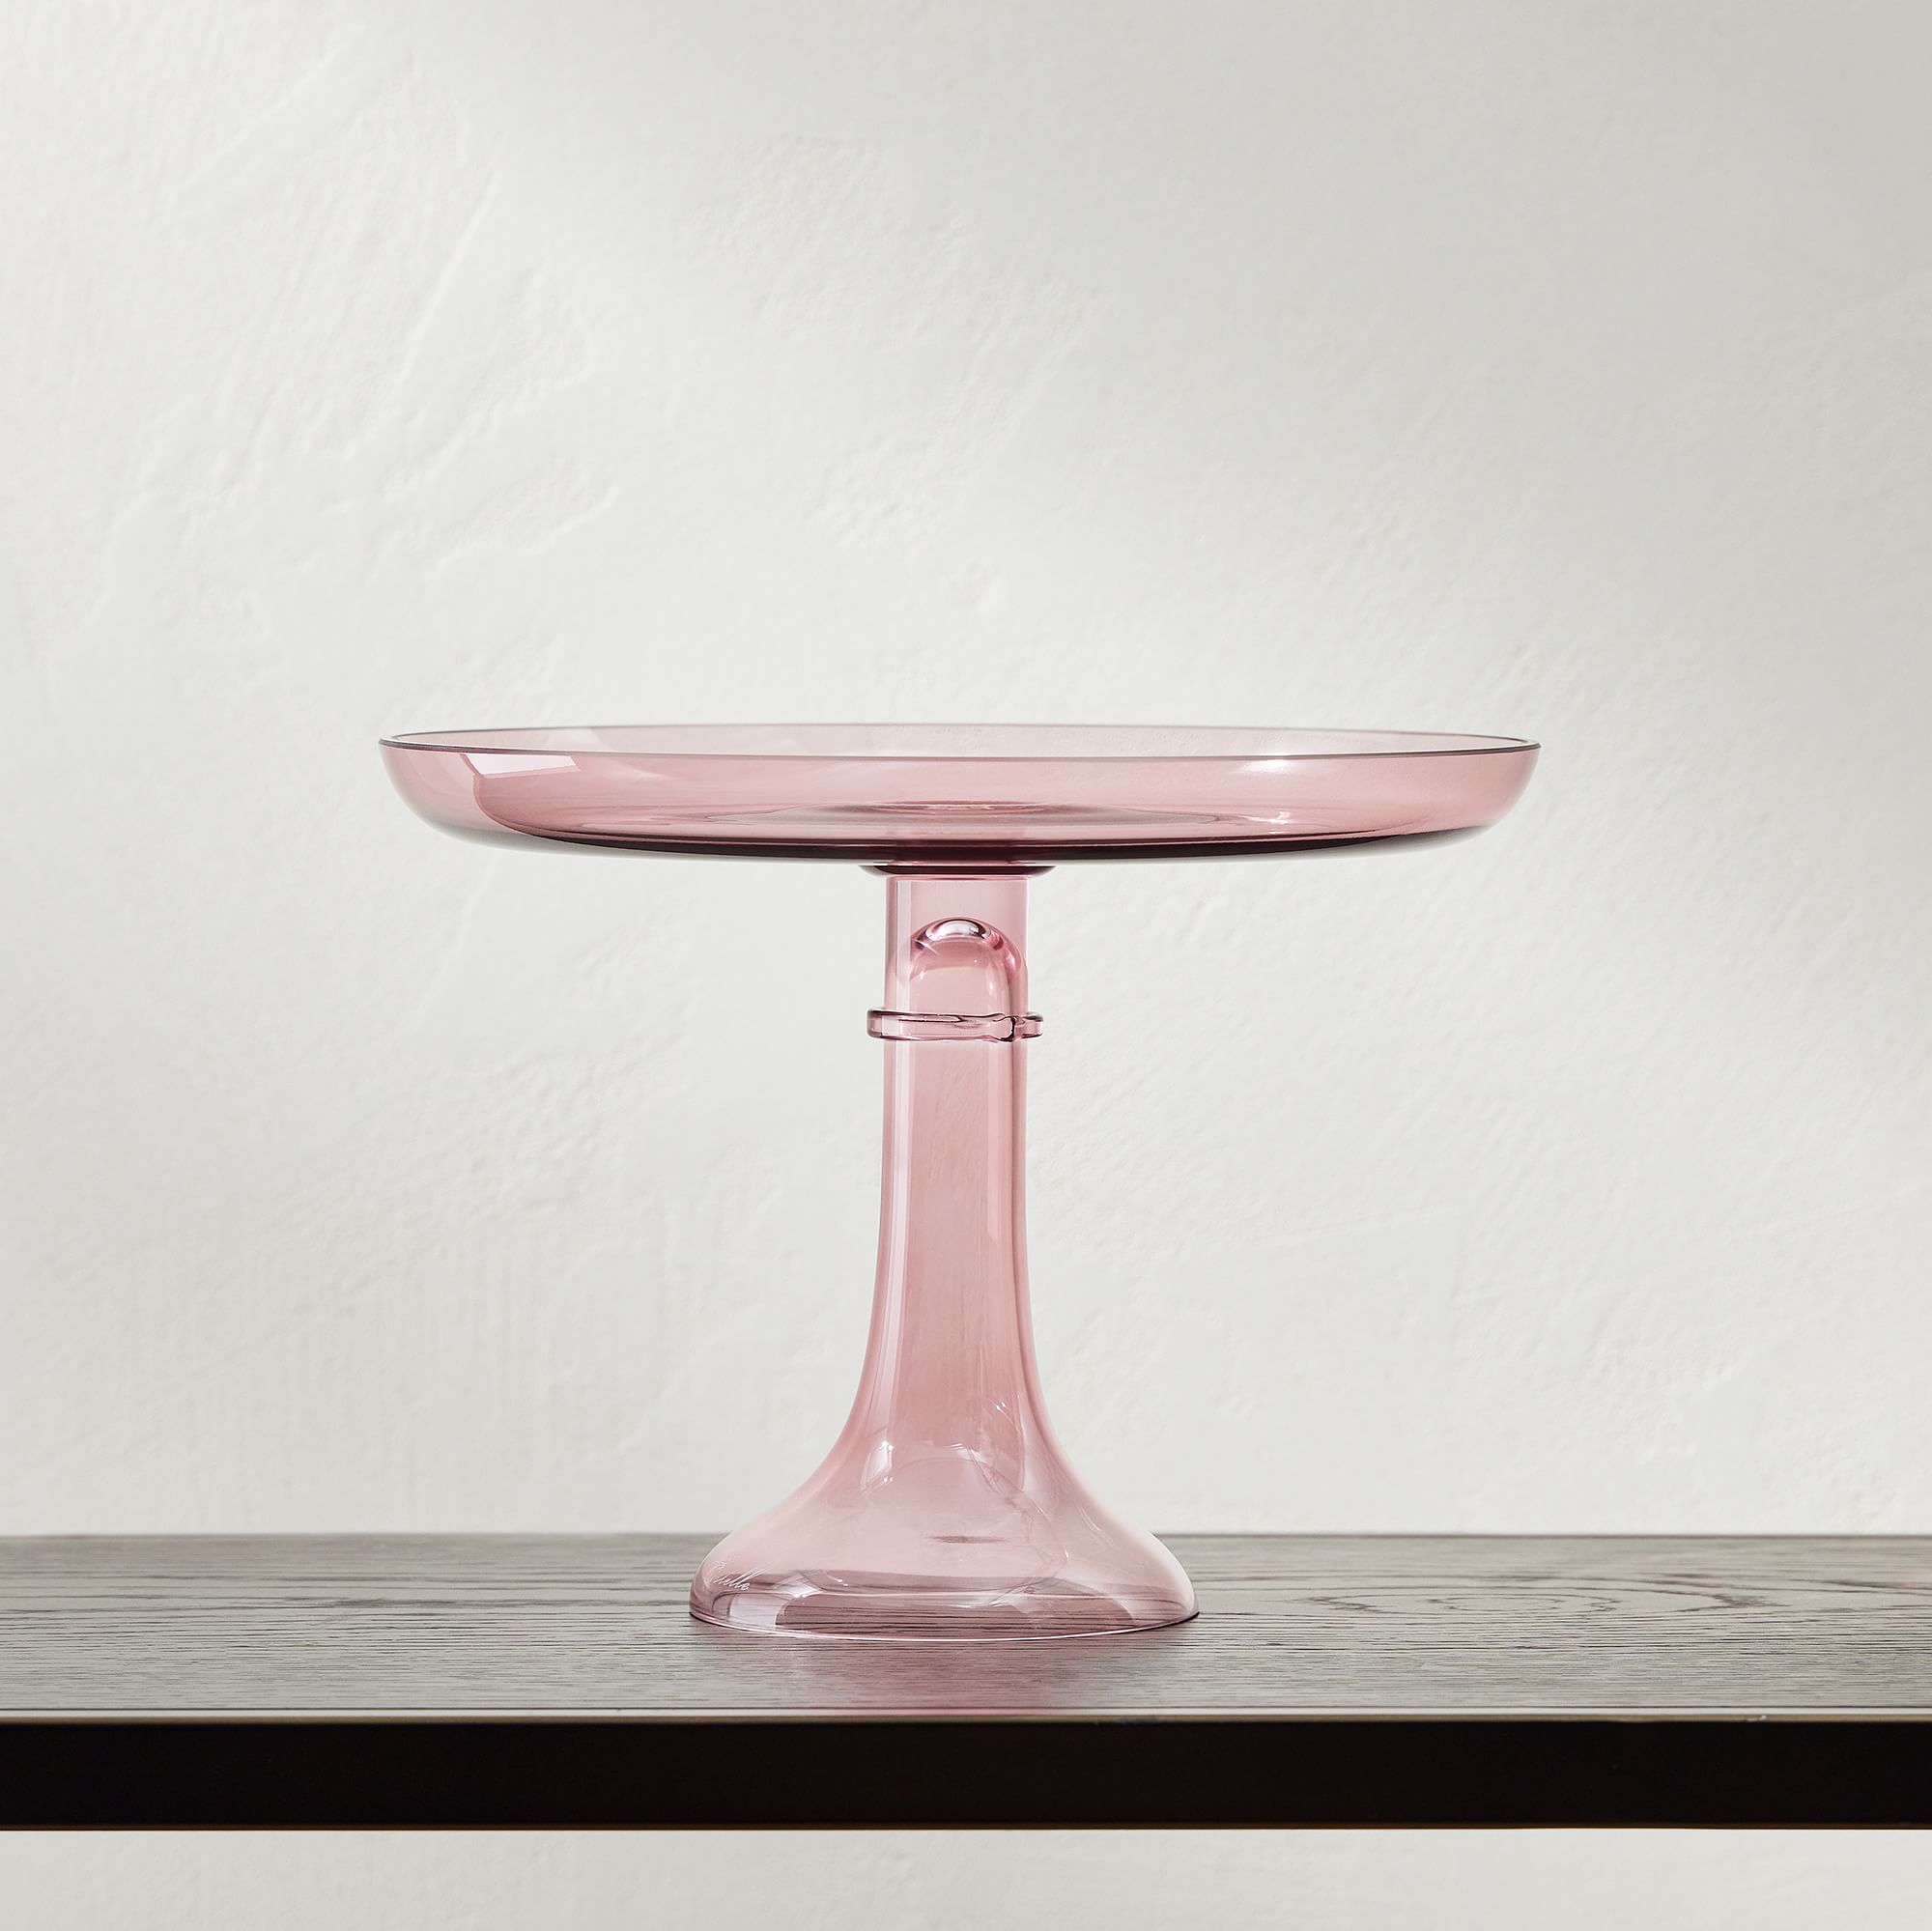 Estelle Colored Glass Cake Stand & Dome | West Elm